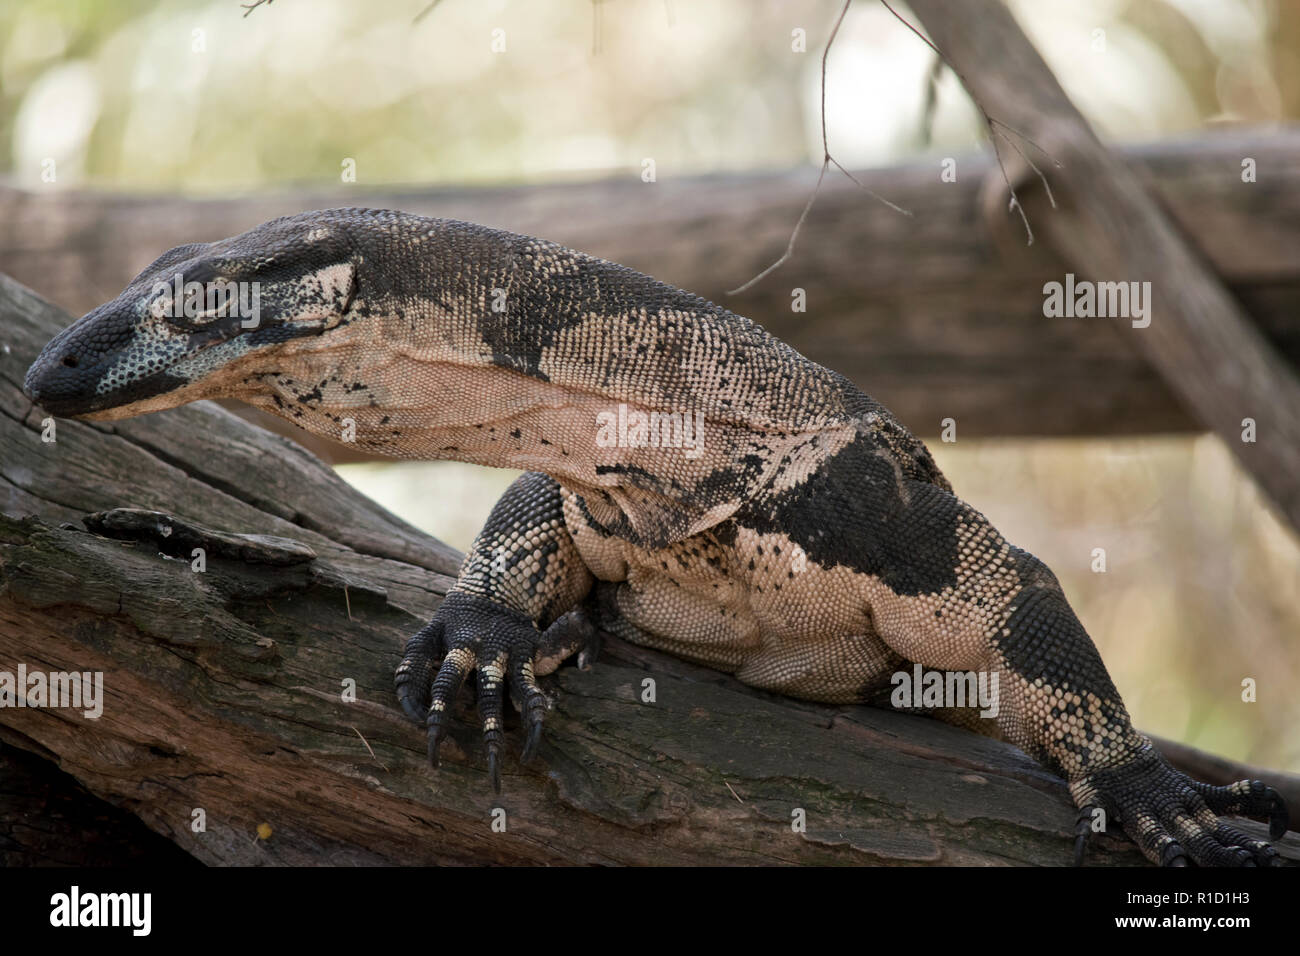 this is a close up of a lace monitor lizard Stock Photo